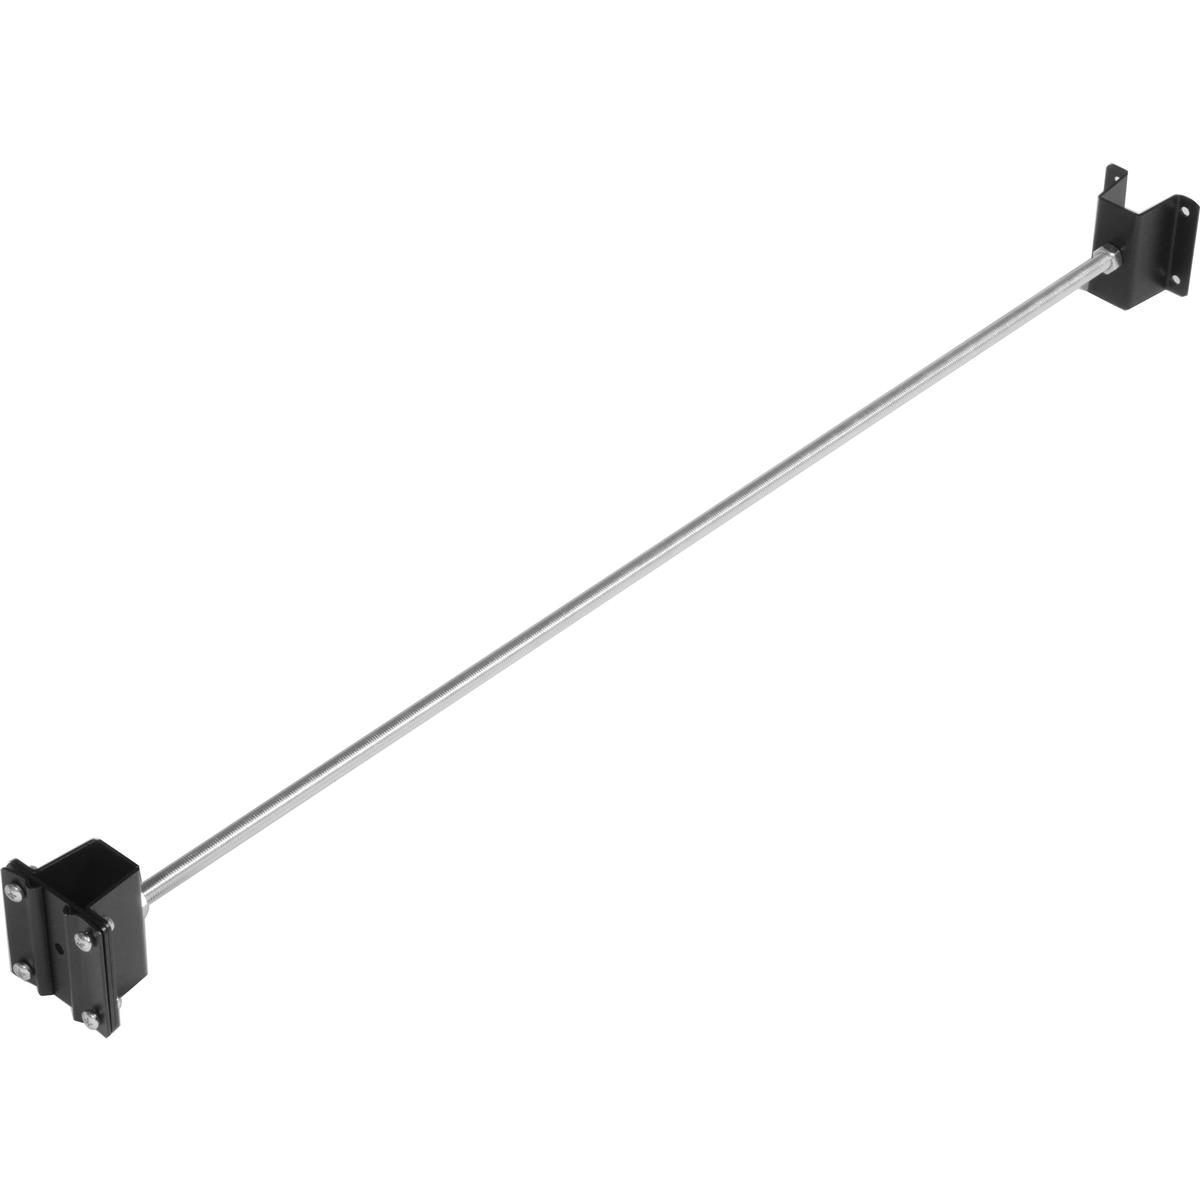 Image of Manfrotto Bracket with Rod for Ceiling Fixture